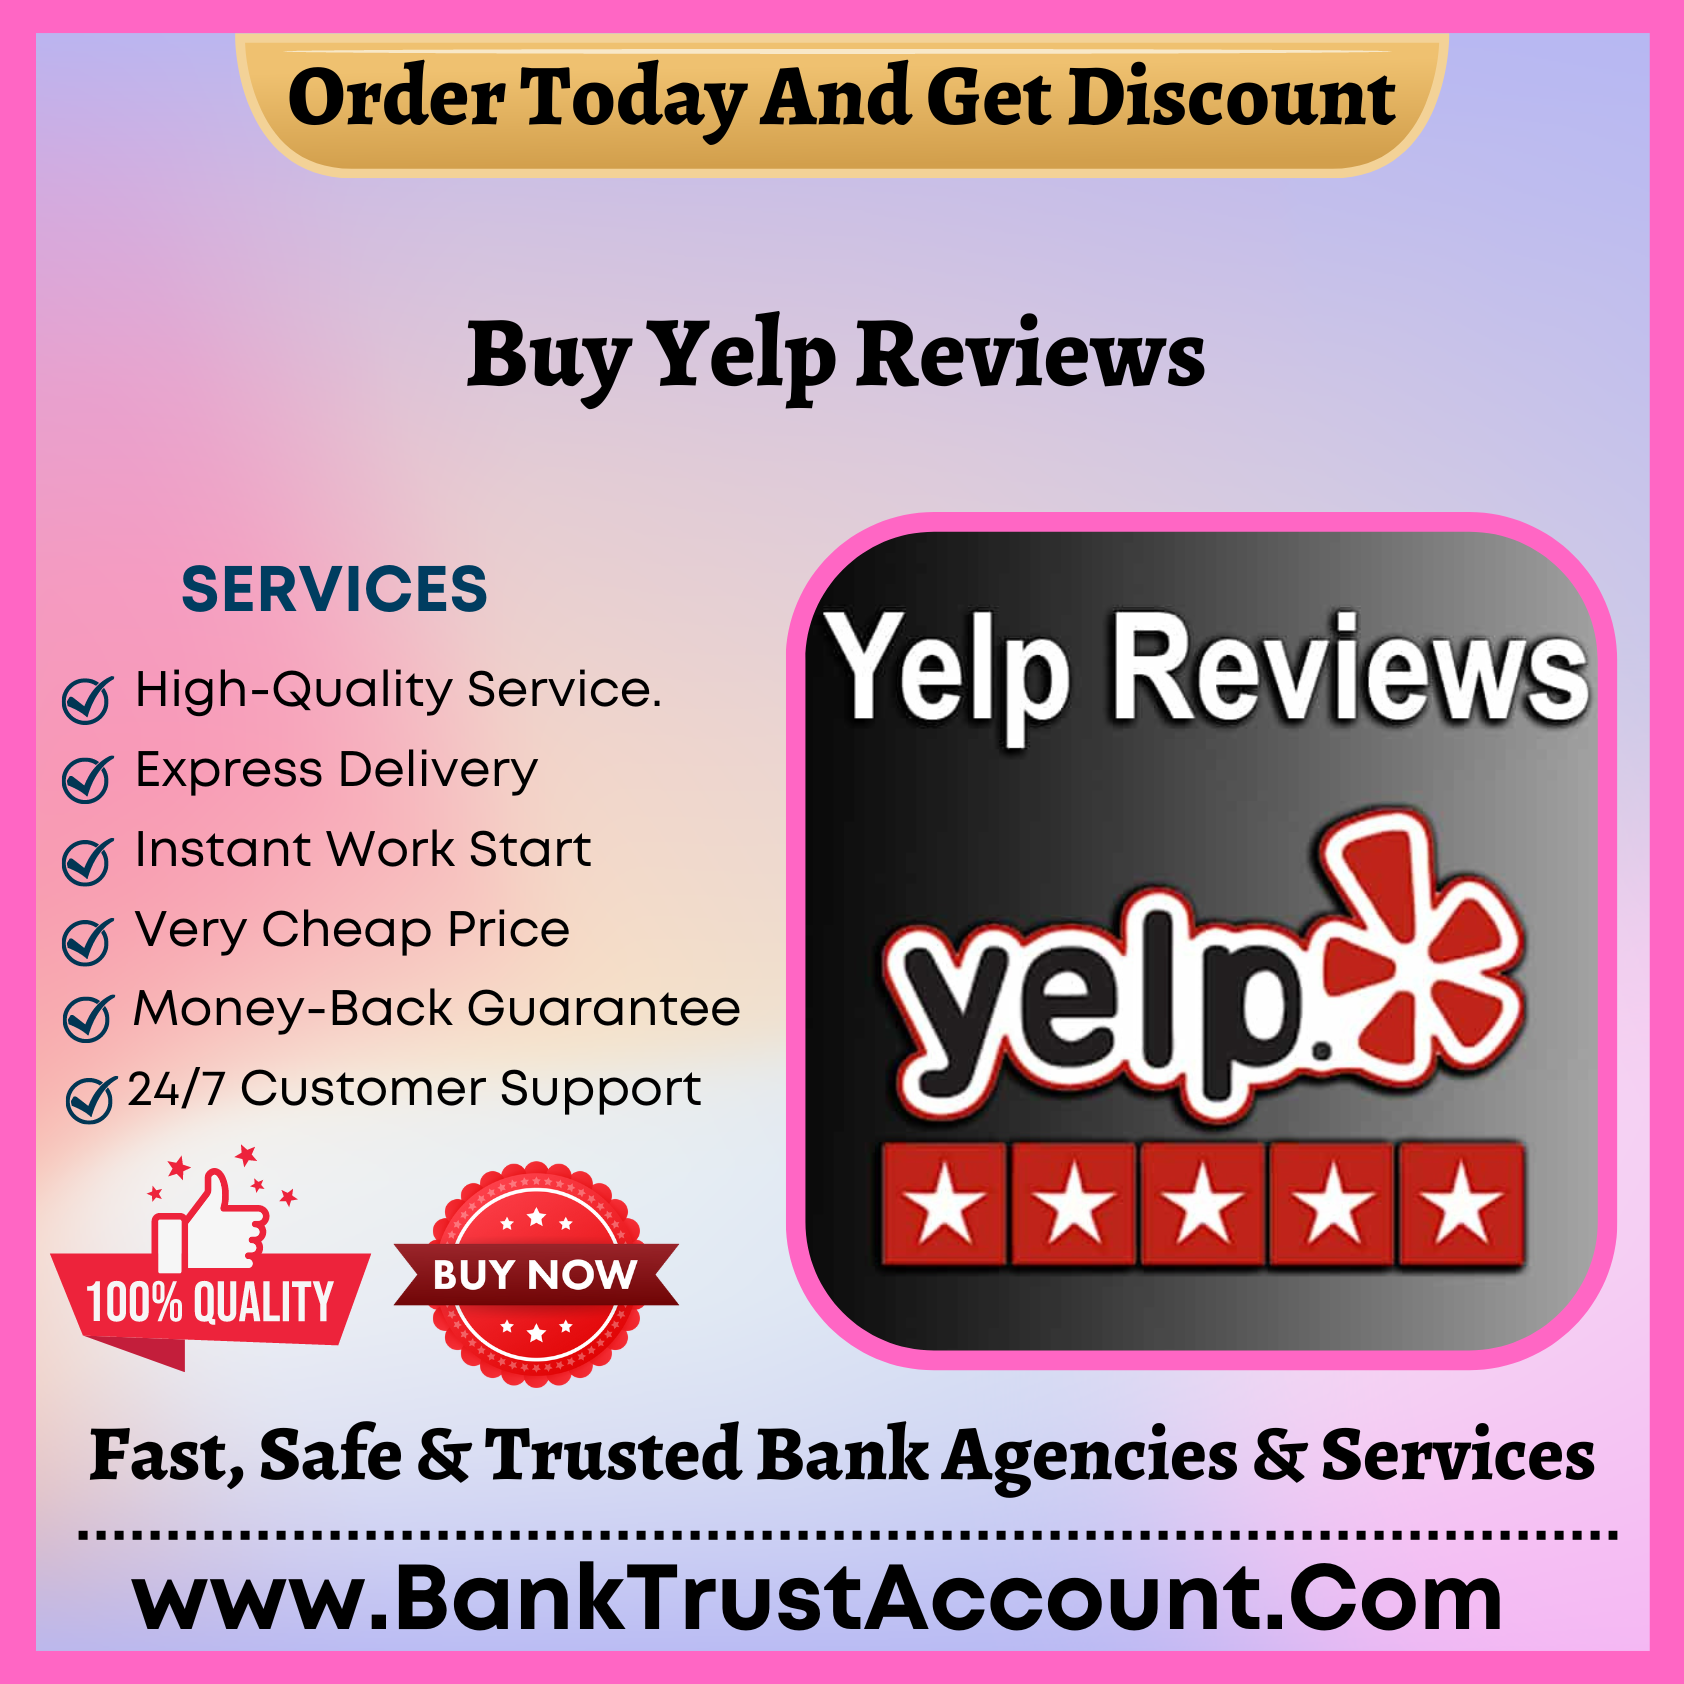 Buy Yelp Reviews Cheap - With 100% Permanent Reviews